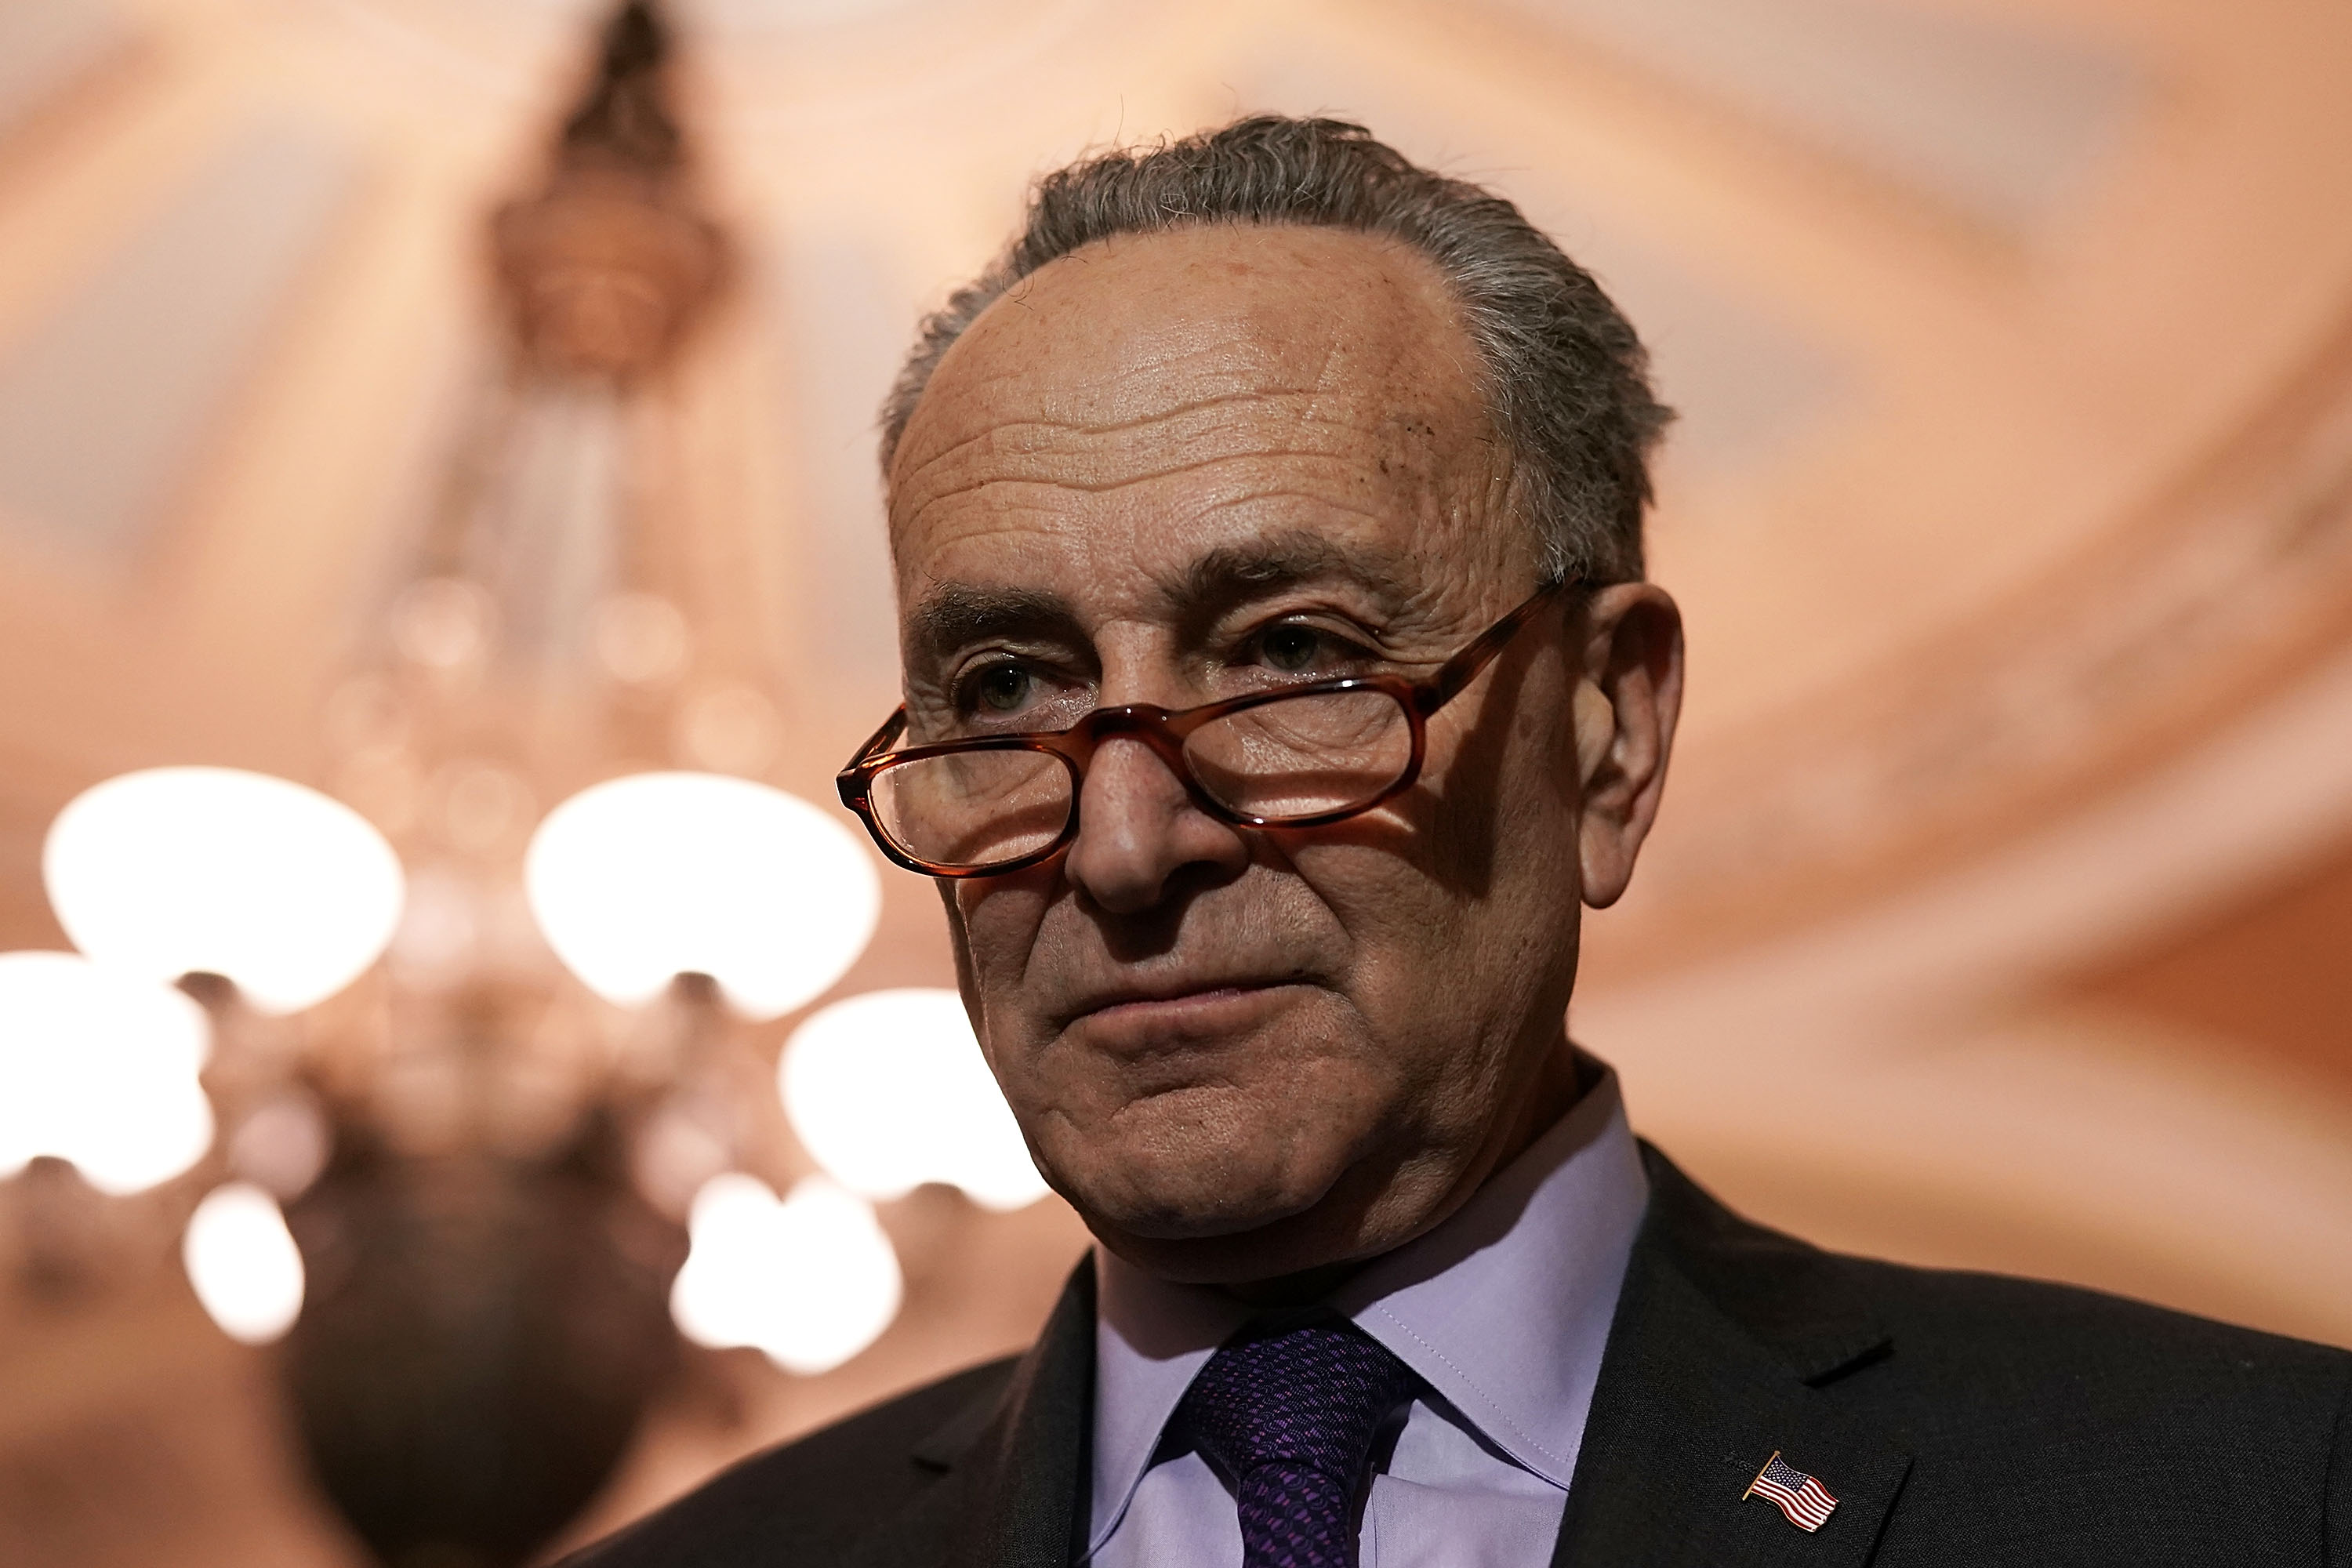 U.S. Senate Minority Leader Sen. Chuck Schumer (D-NY) speaks to members of the media after a Senate Democratic Policy Luncheon January 17, 2018 at the Capitol in Washington, DC. (Alex Wong&mdash;Getty Images)